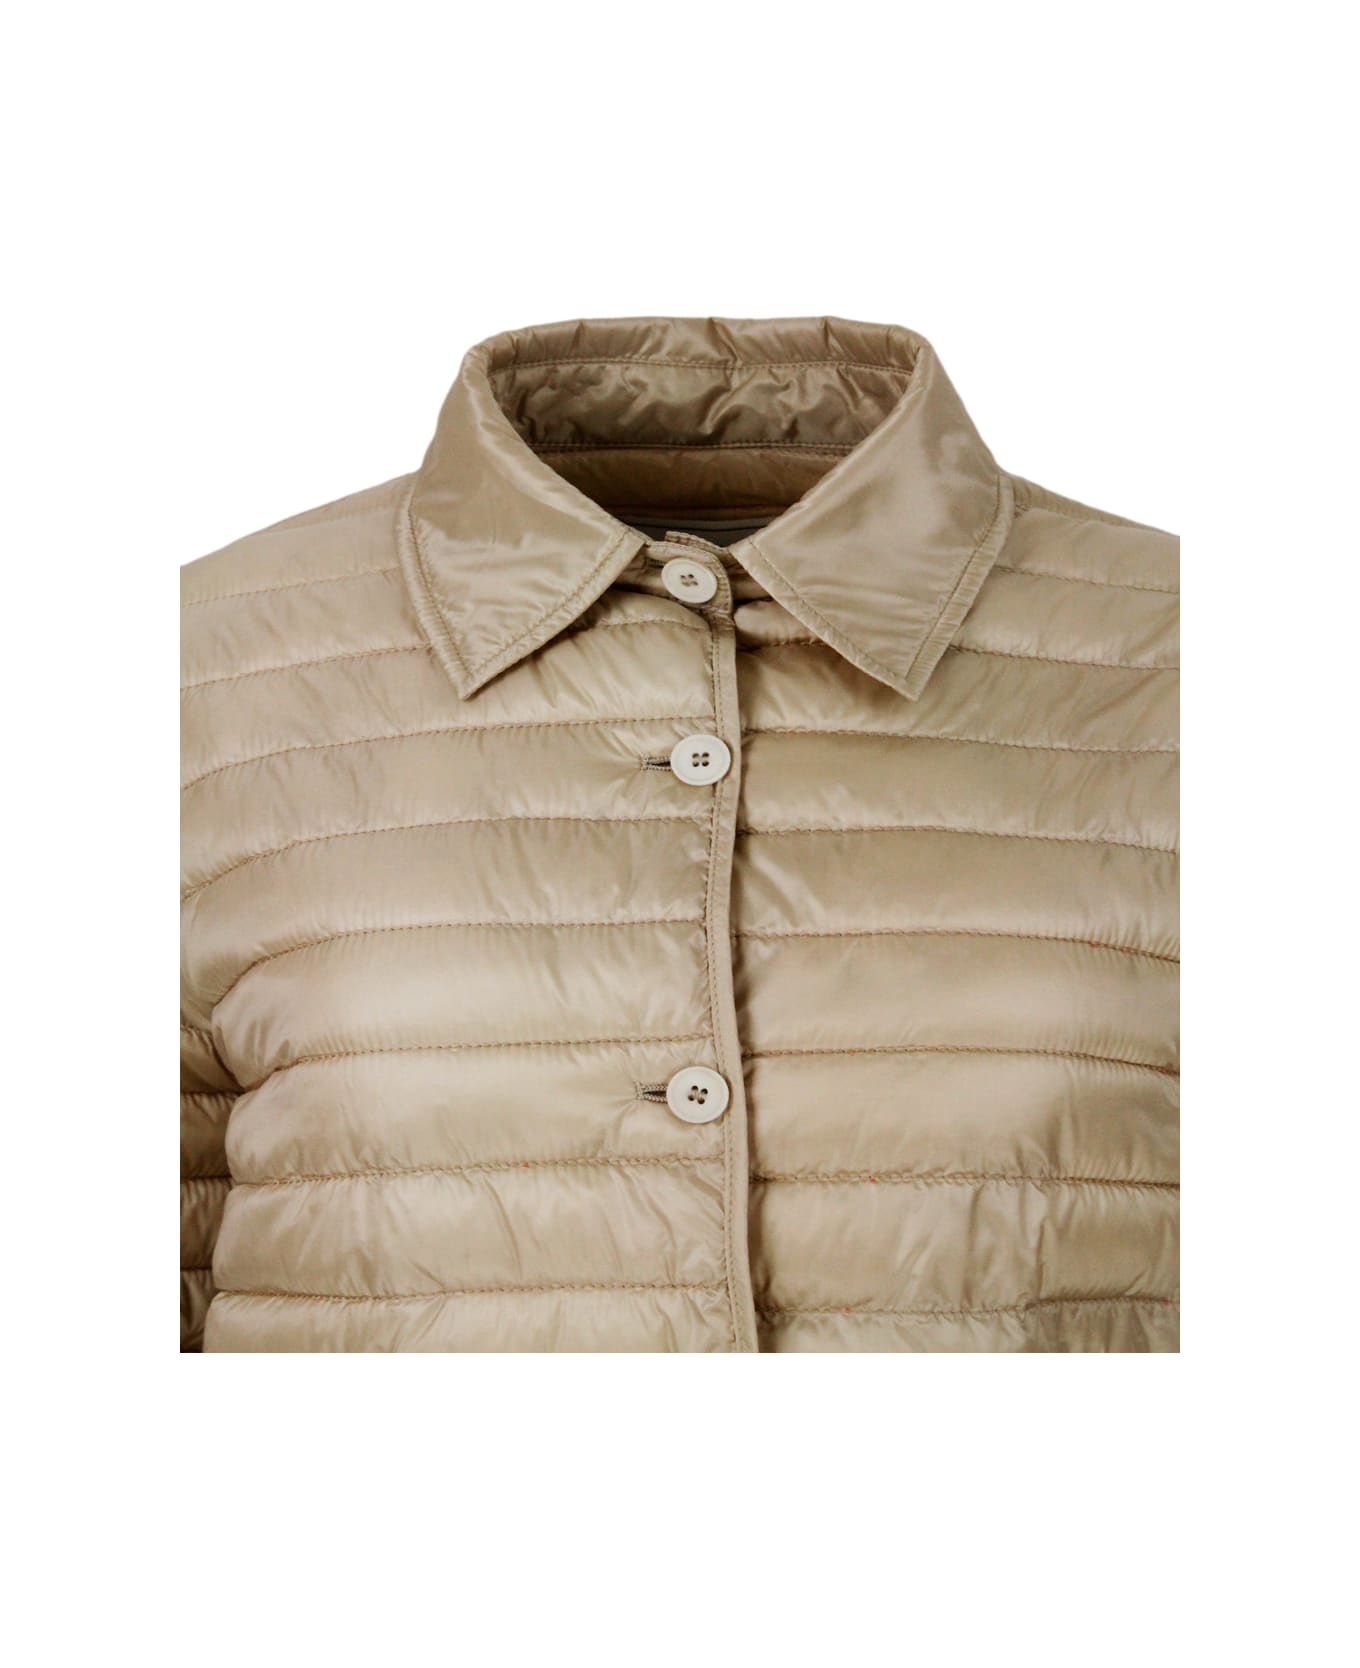 Antonelli Lightweight 100g Padded Jacket With Shirt Collar, Button Closure And Patch Pockets - Beige ダウンジャケット